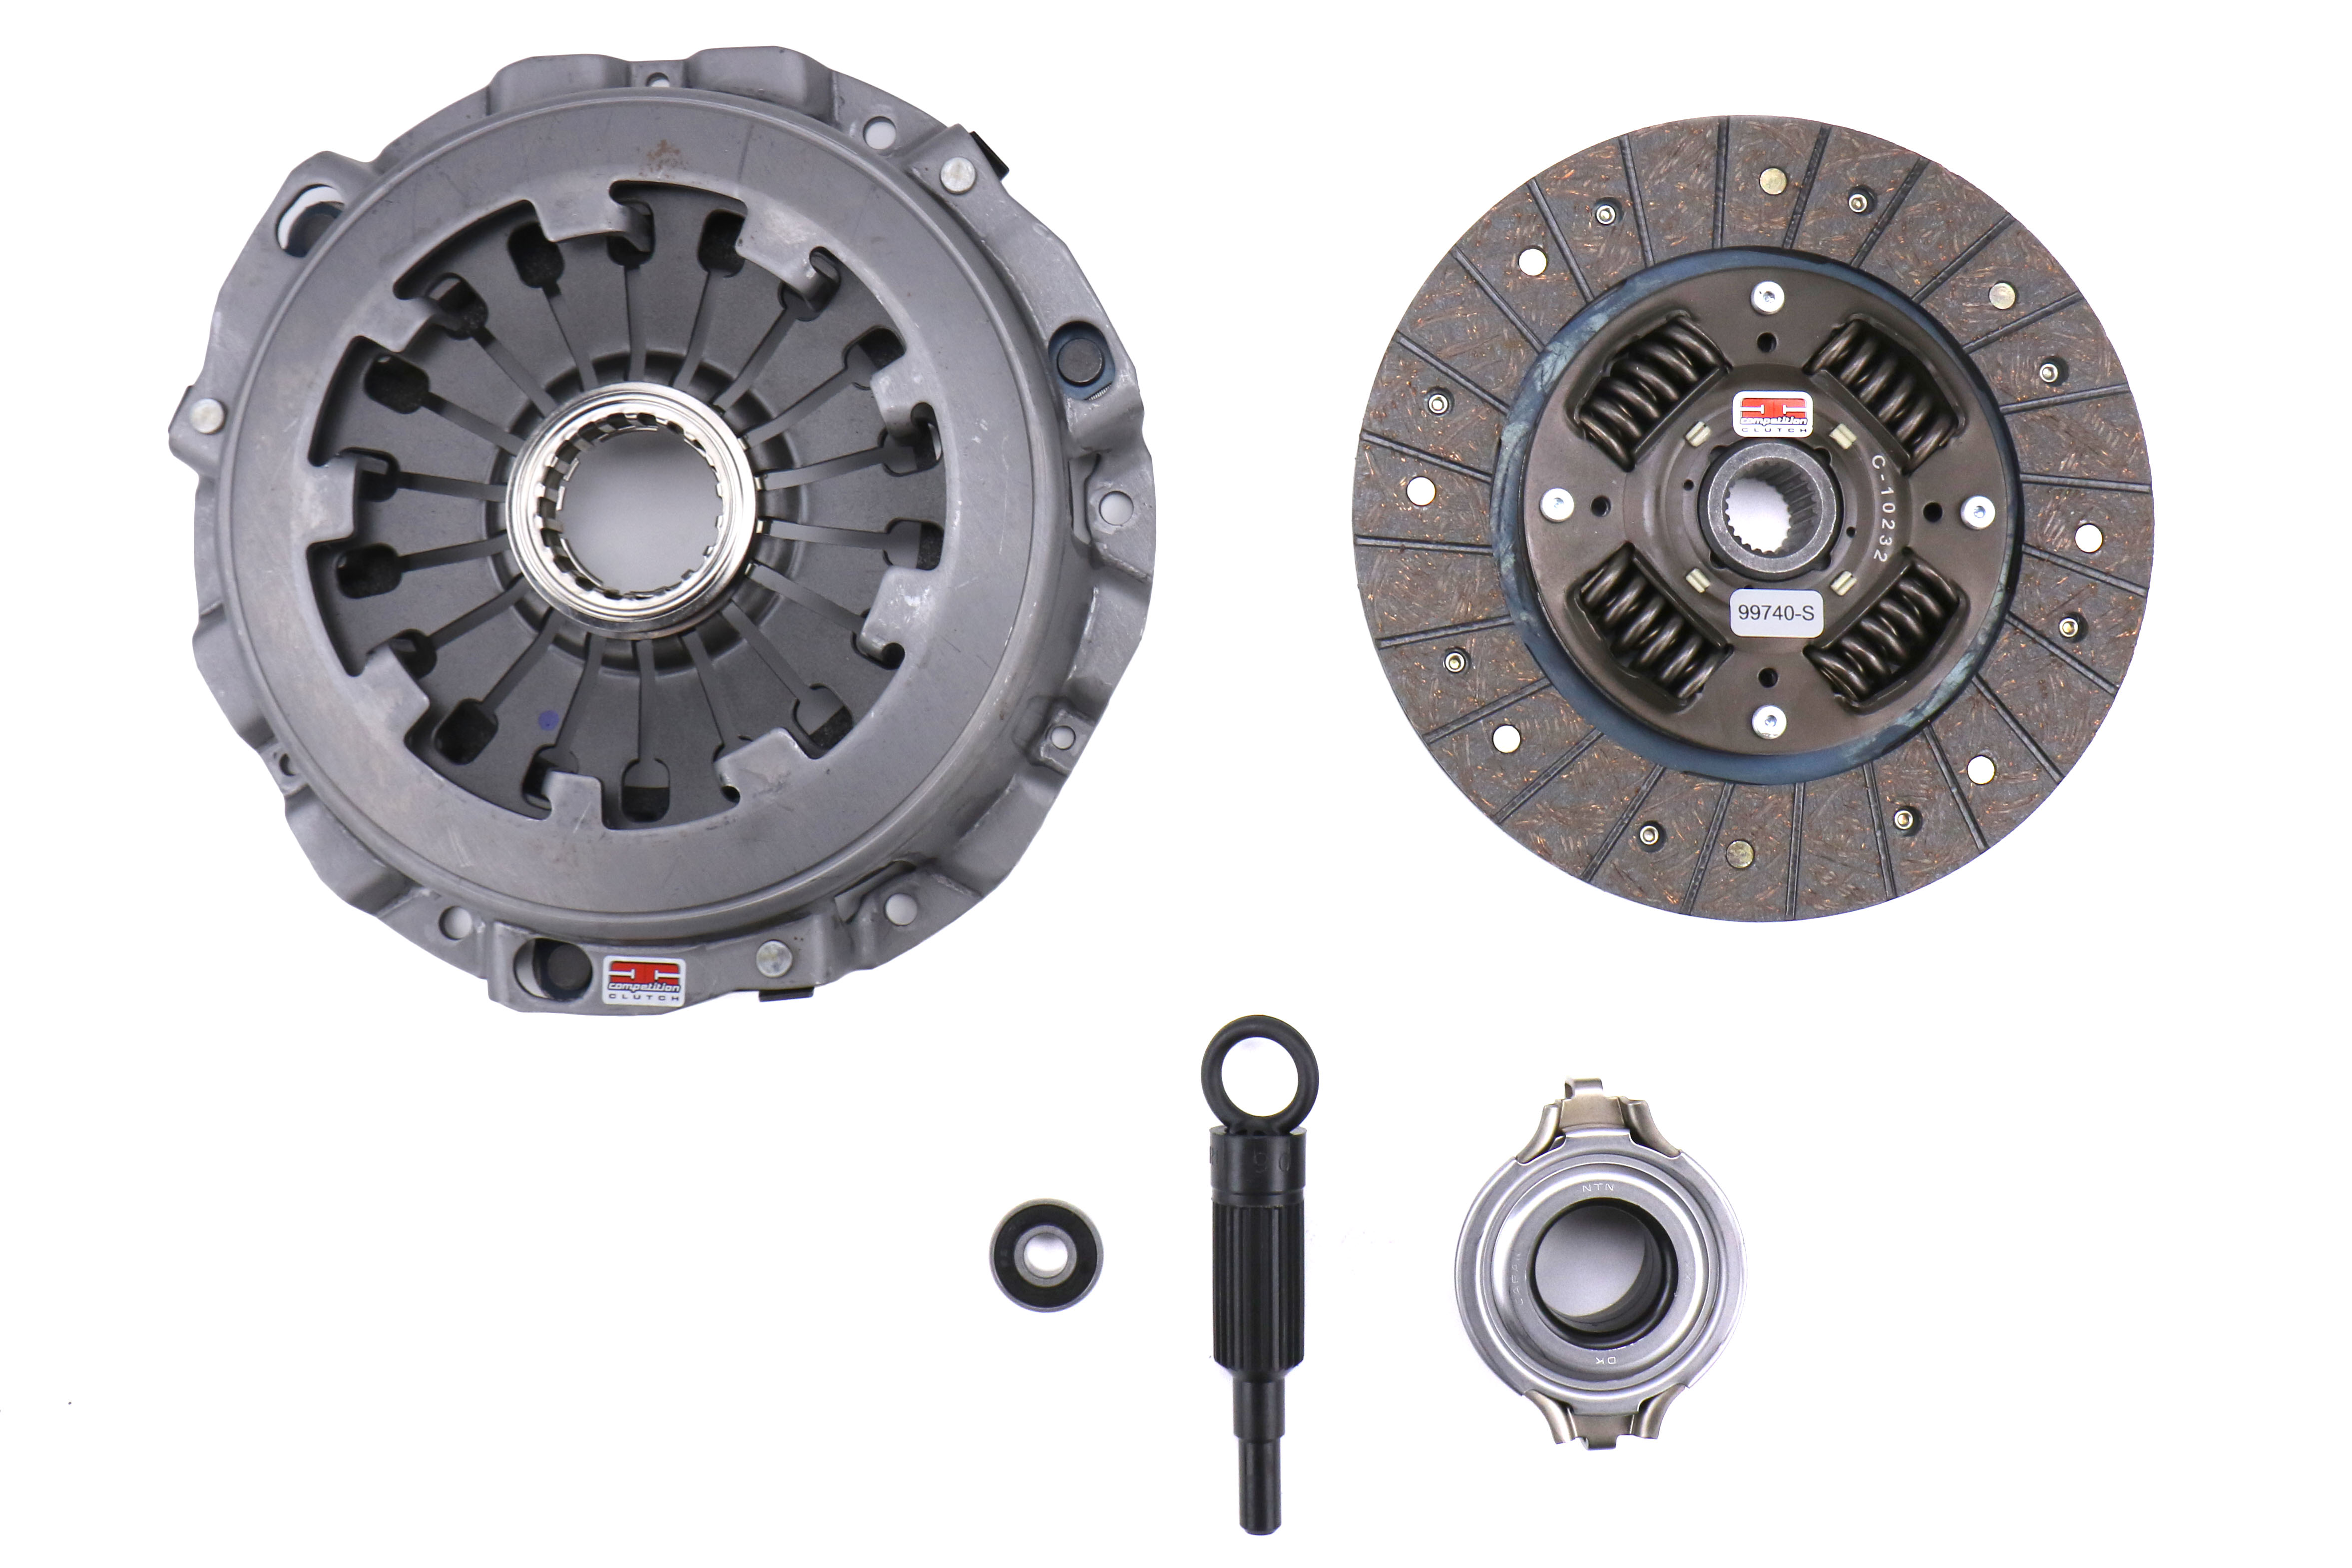 Competition Clutch OE Replacement Clutch